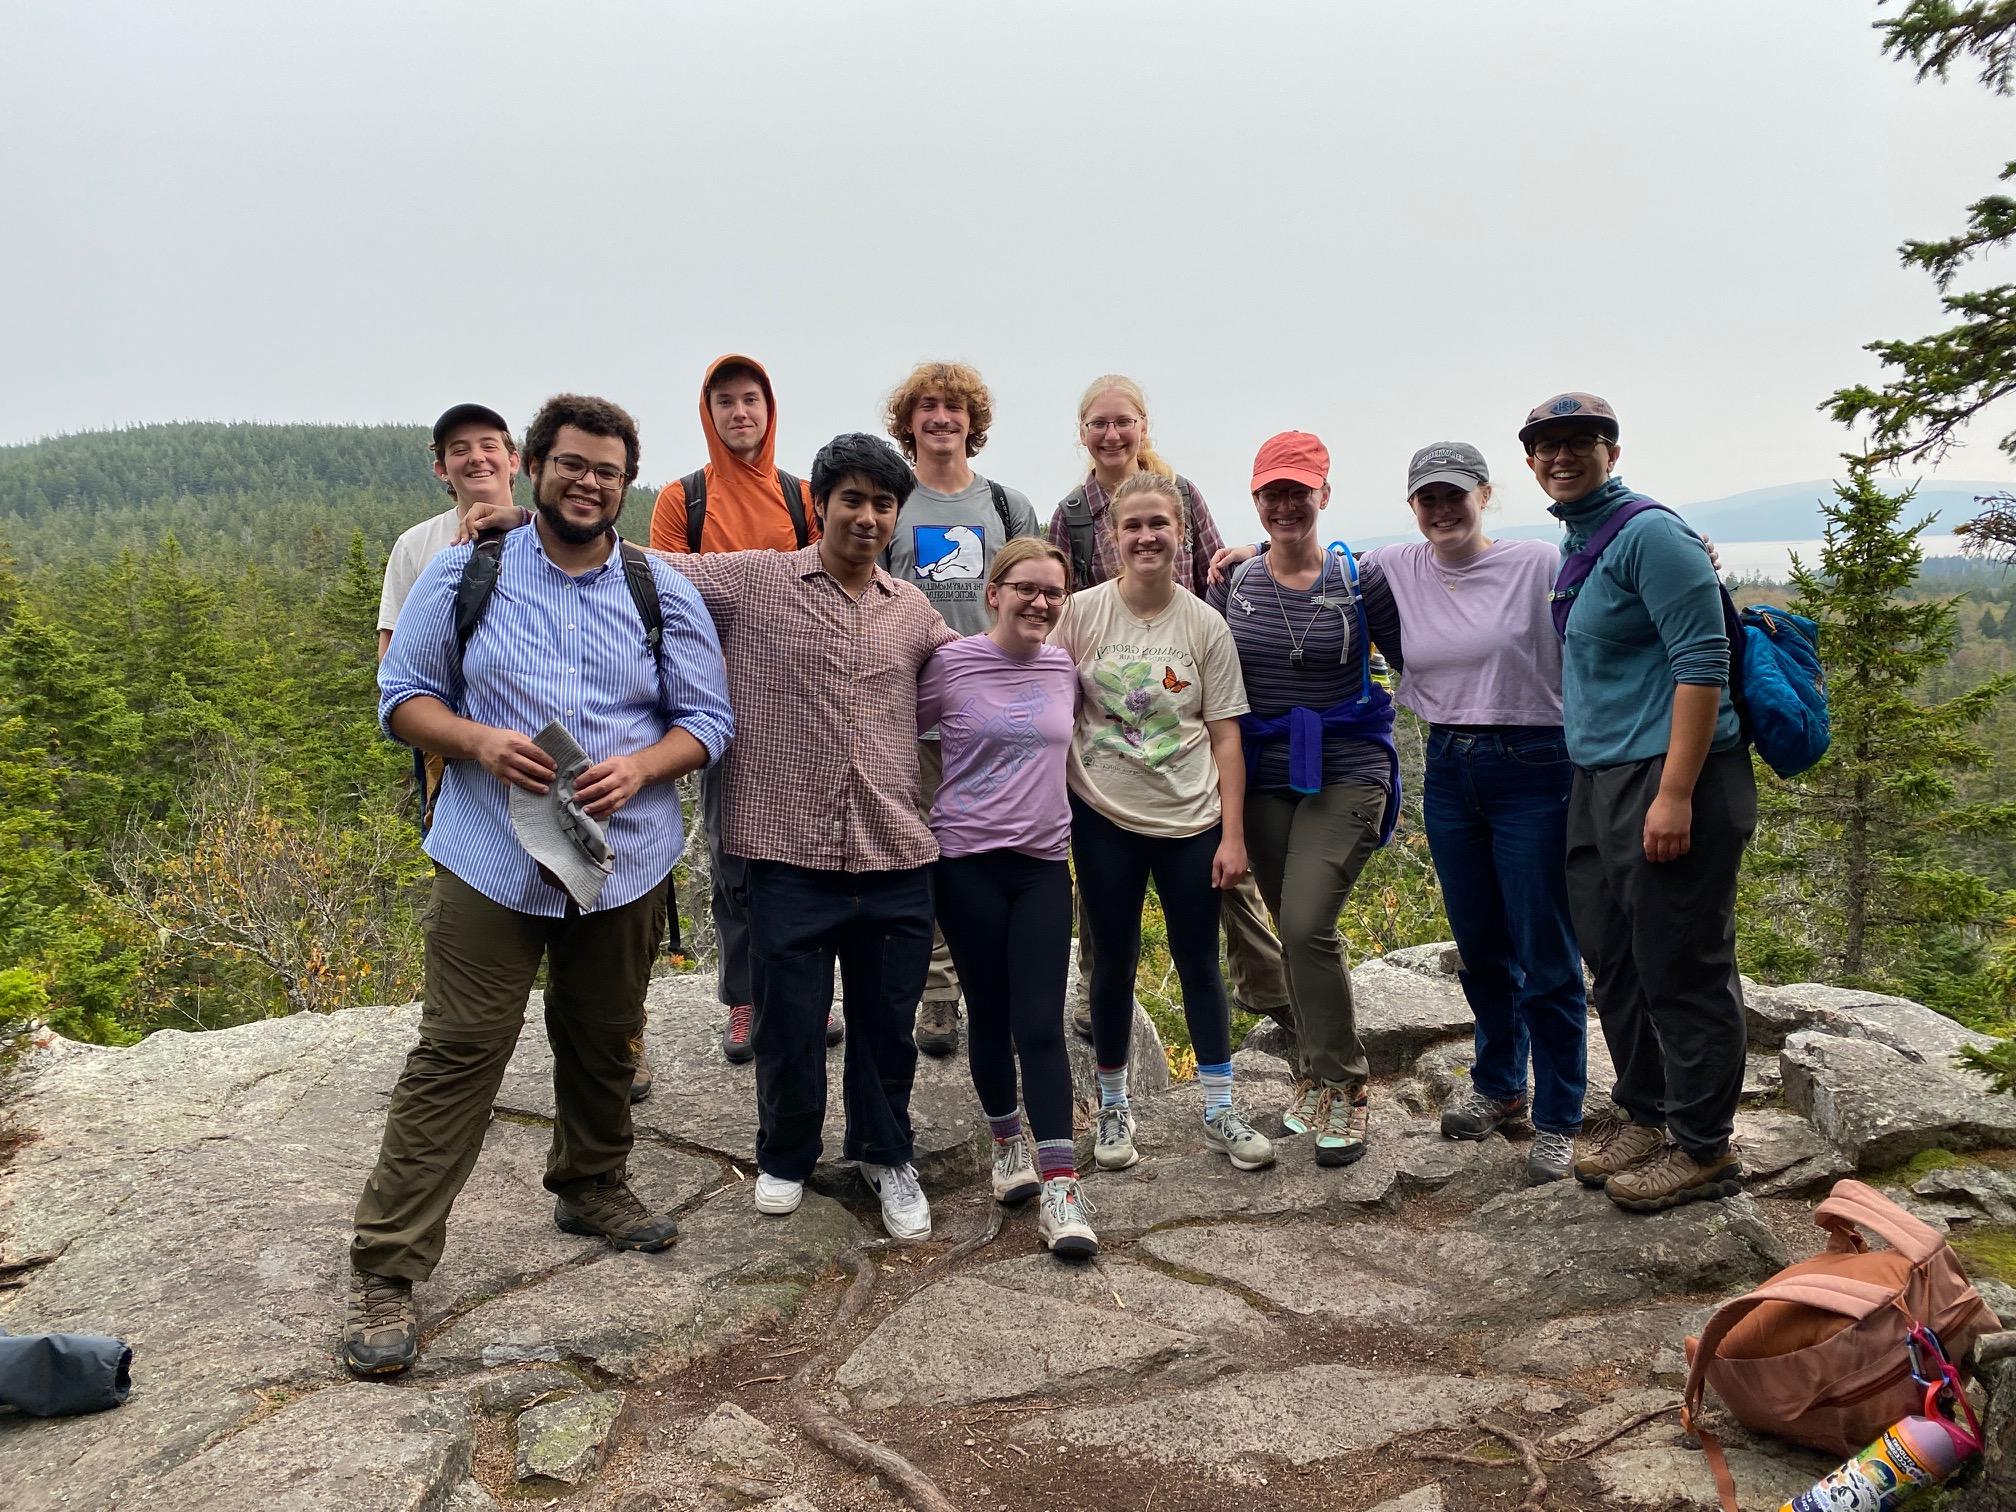 Students and faculty stop for a photo on their hike on the Schoodic Head Trail